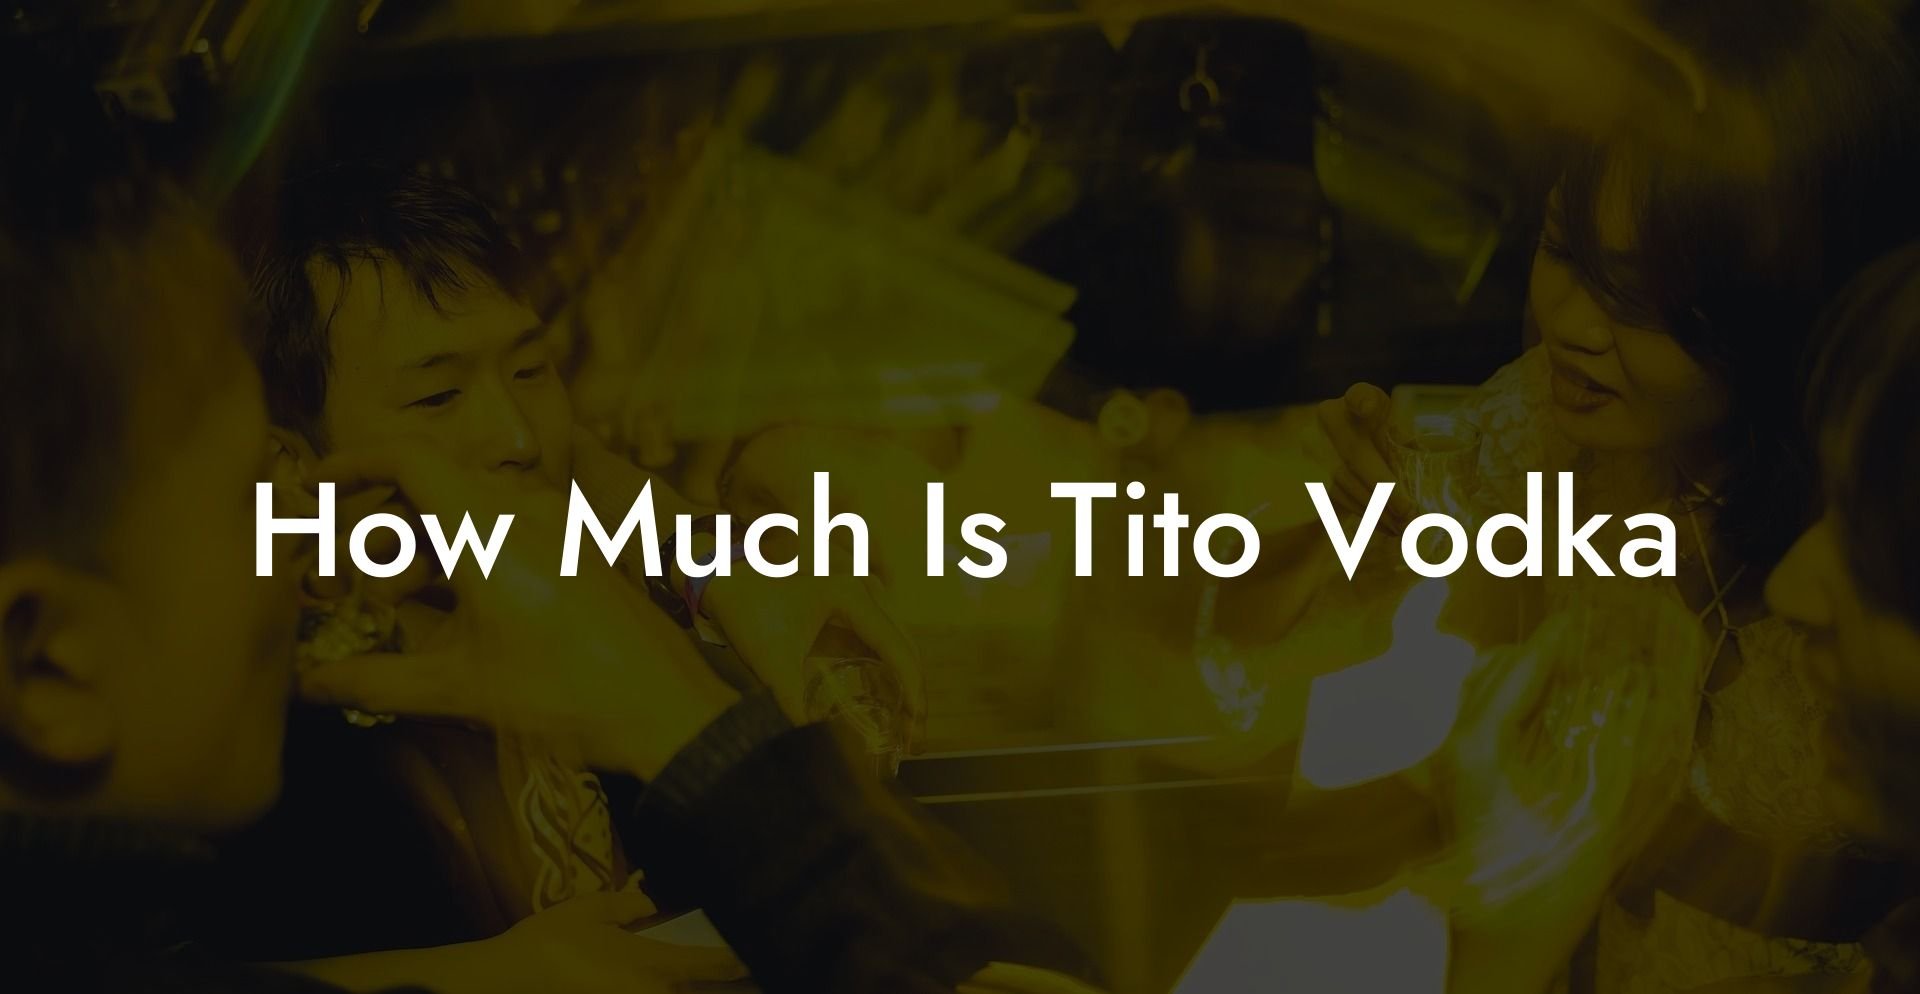 How Much Is Tito Vodka